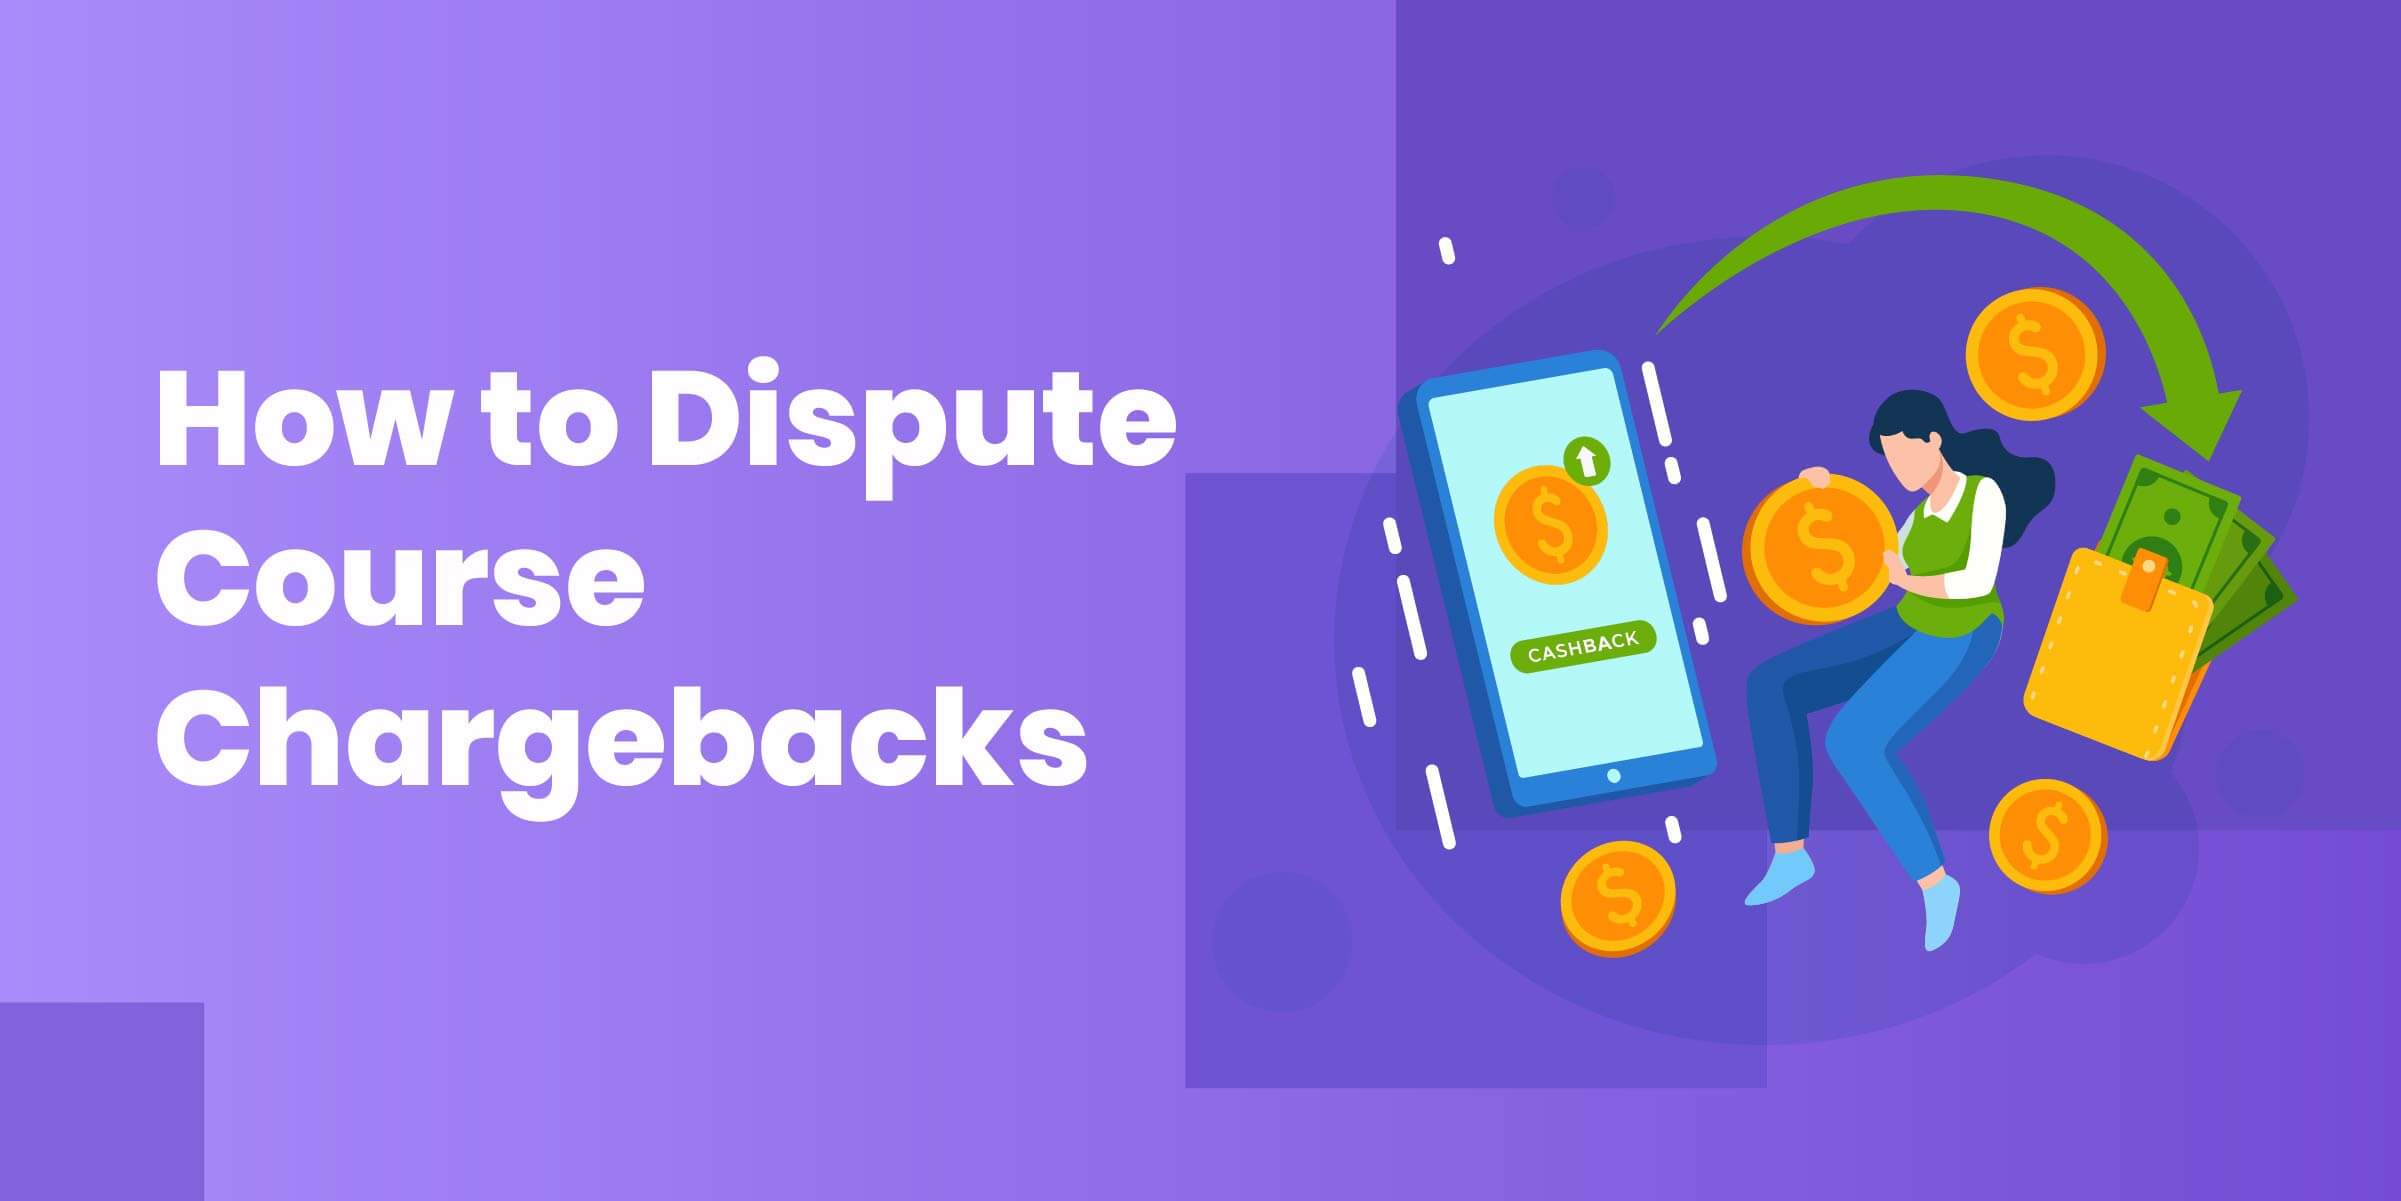 How to Dispute Course Chargebacks